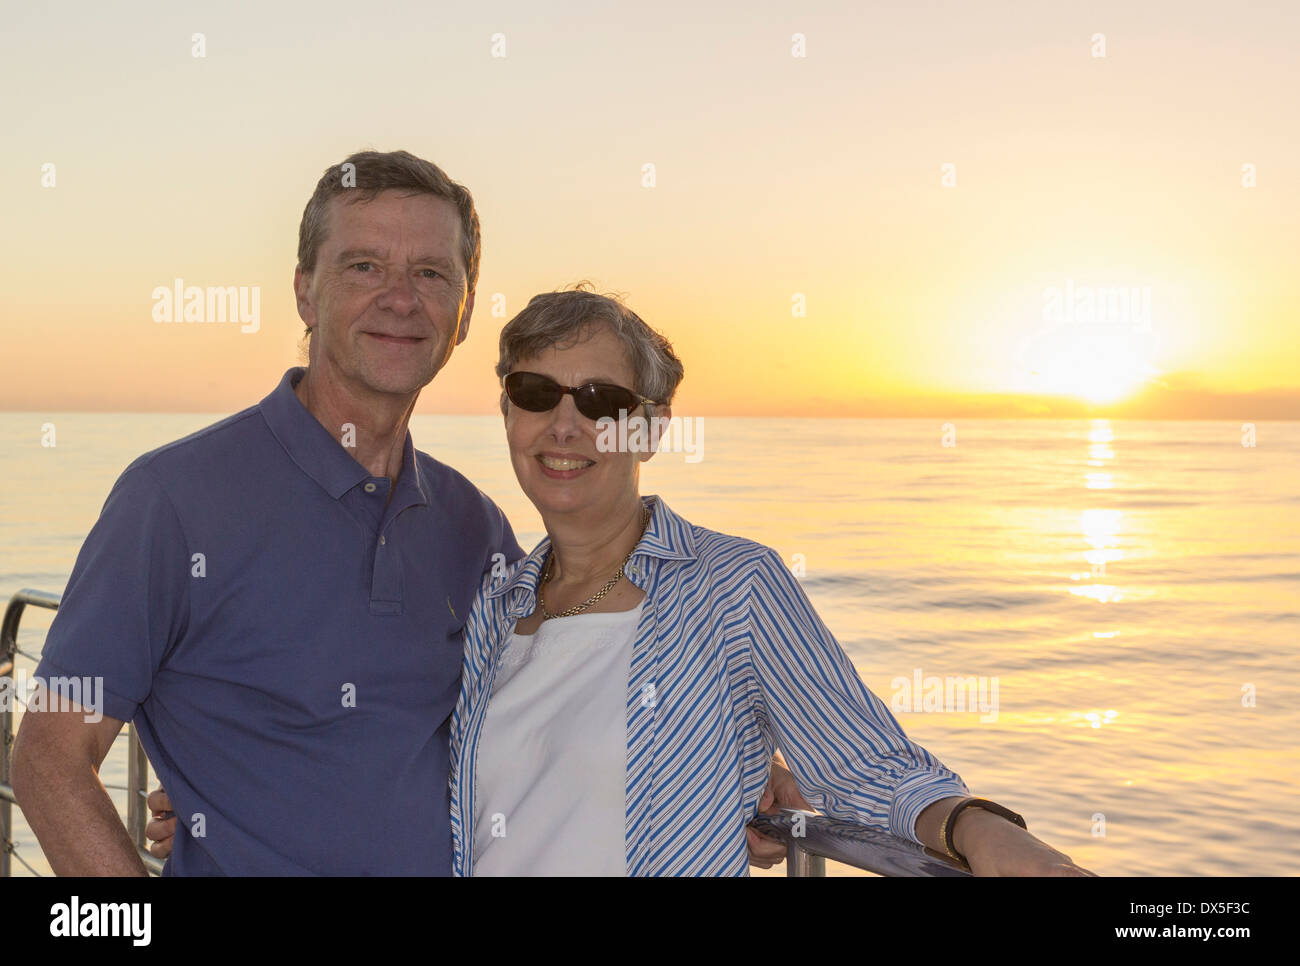 Cruise ship couple on holiday vacation on deck at sunset Stock Photo